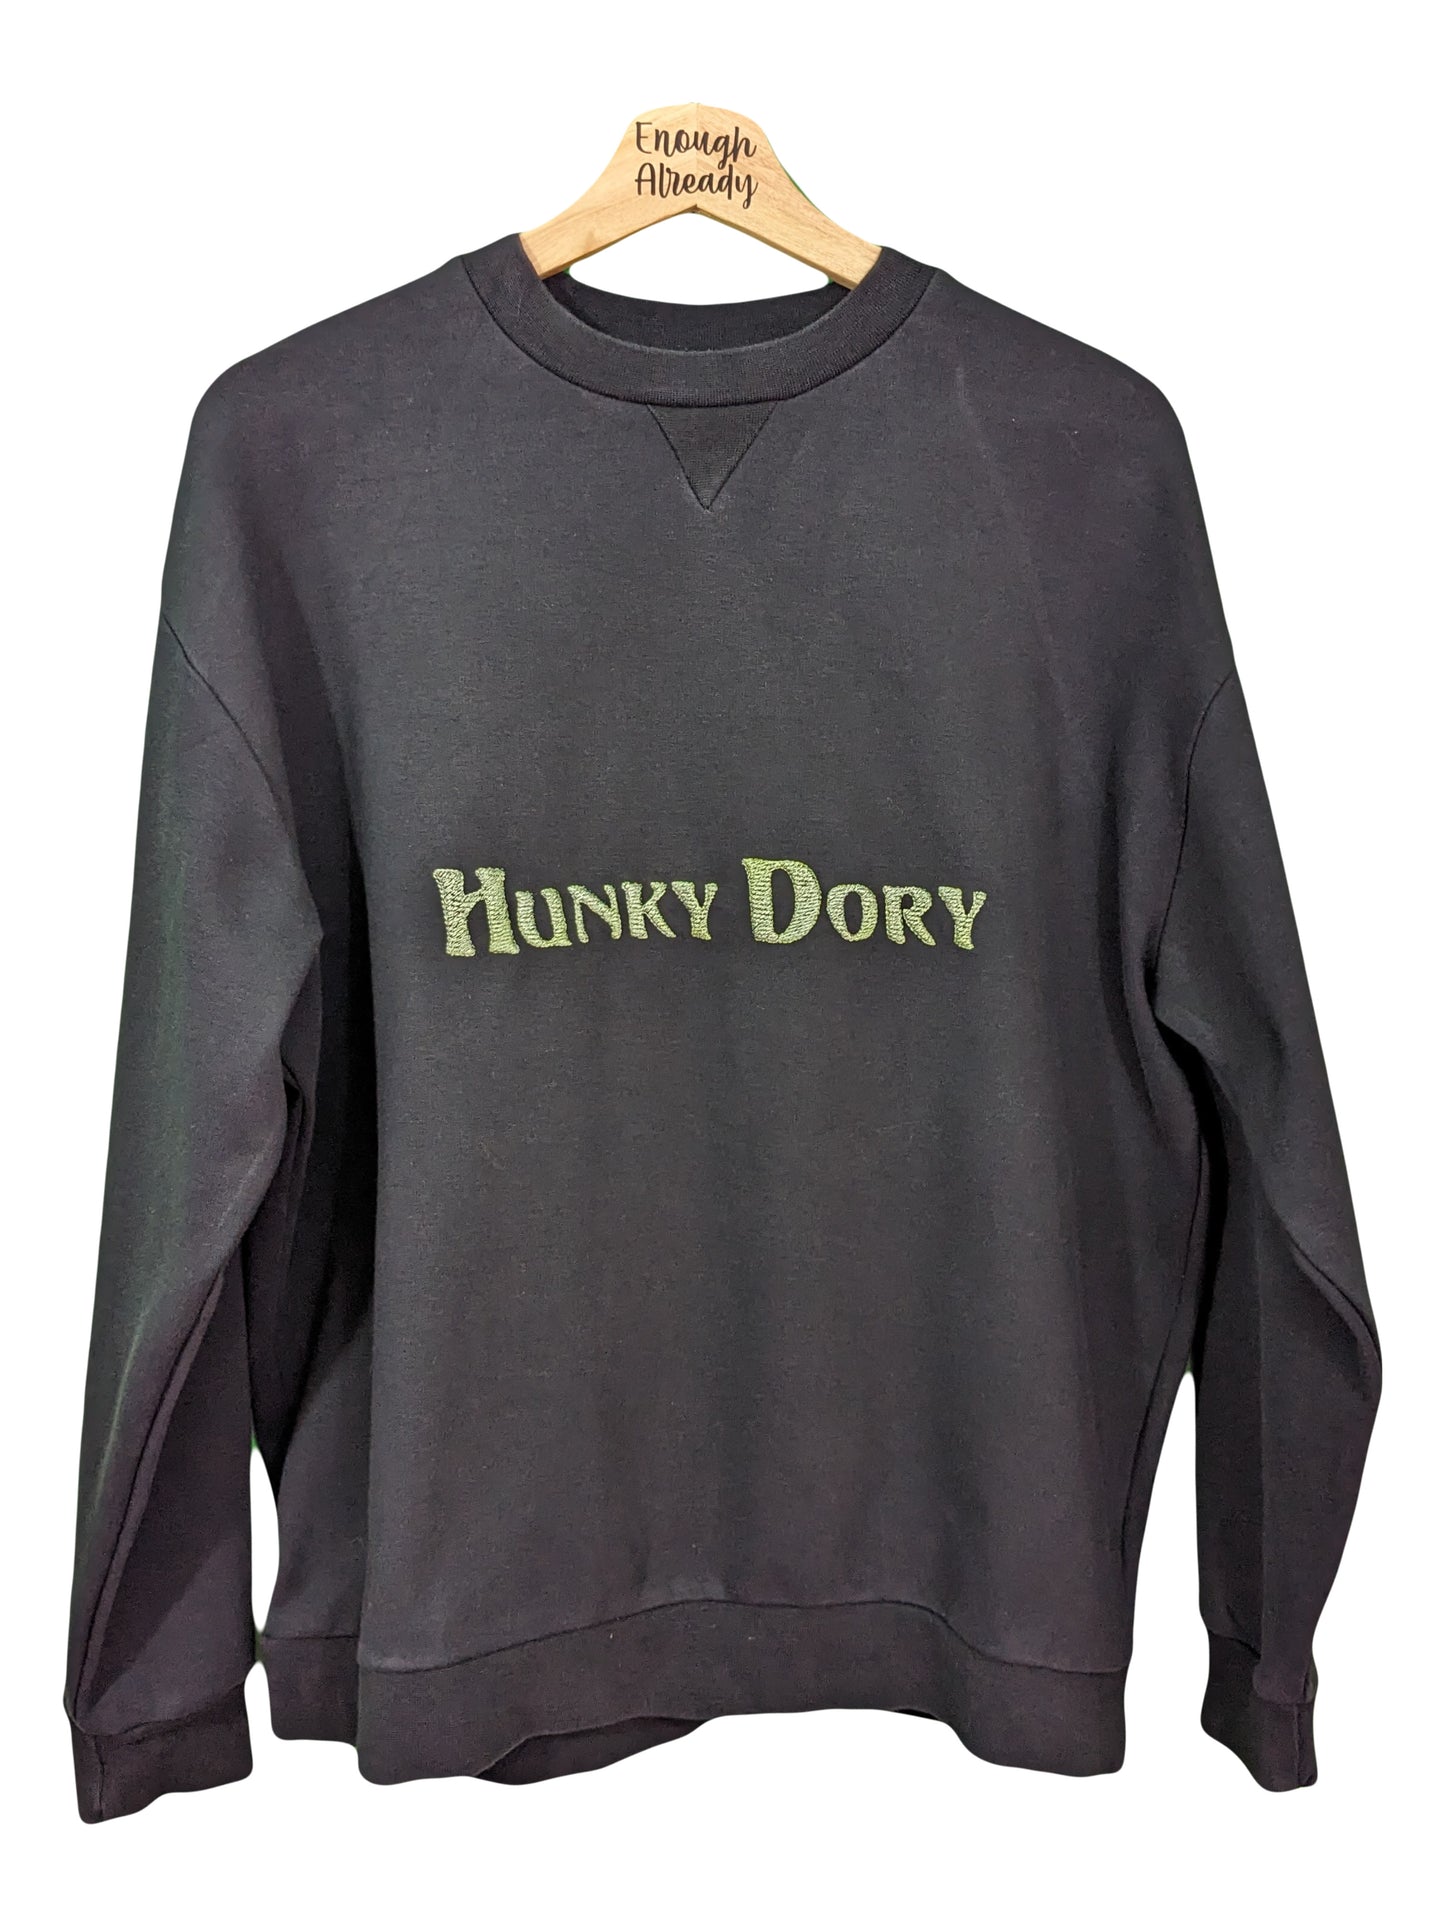 Size Women's Medium Reworked Black Sweatshirt with Embroidered Hunky Dory / David Bowie Inspired Bold Design - One of a Kind